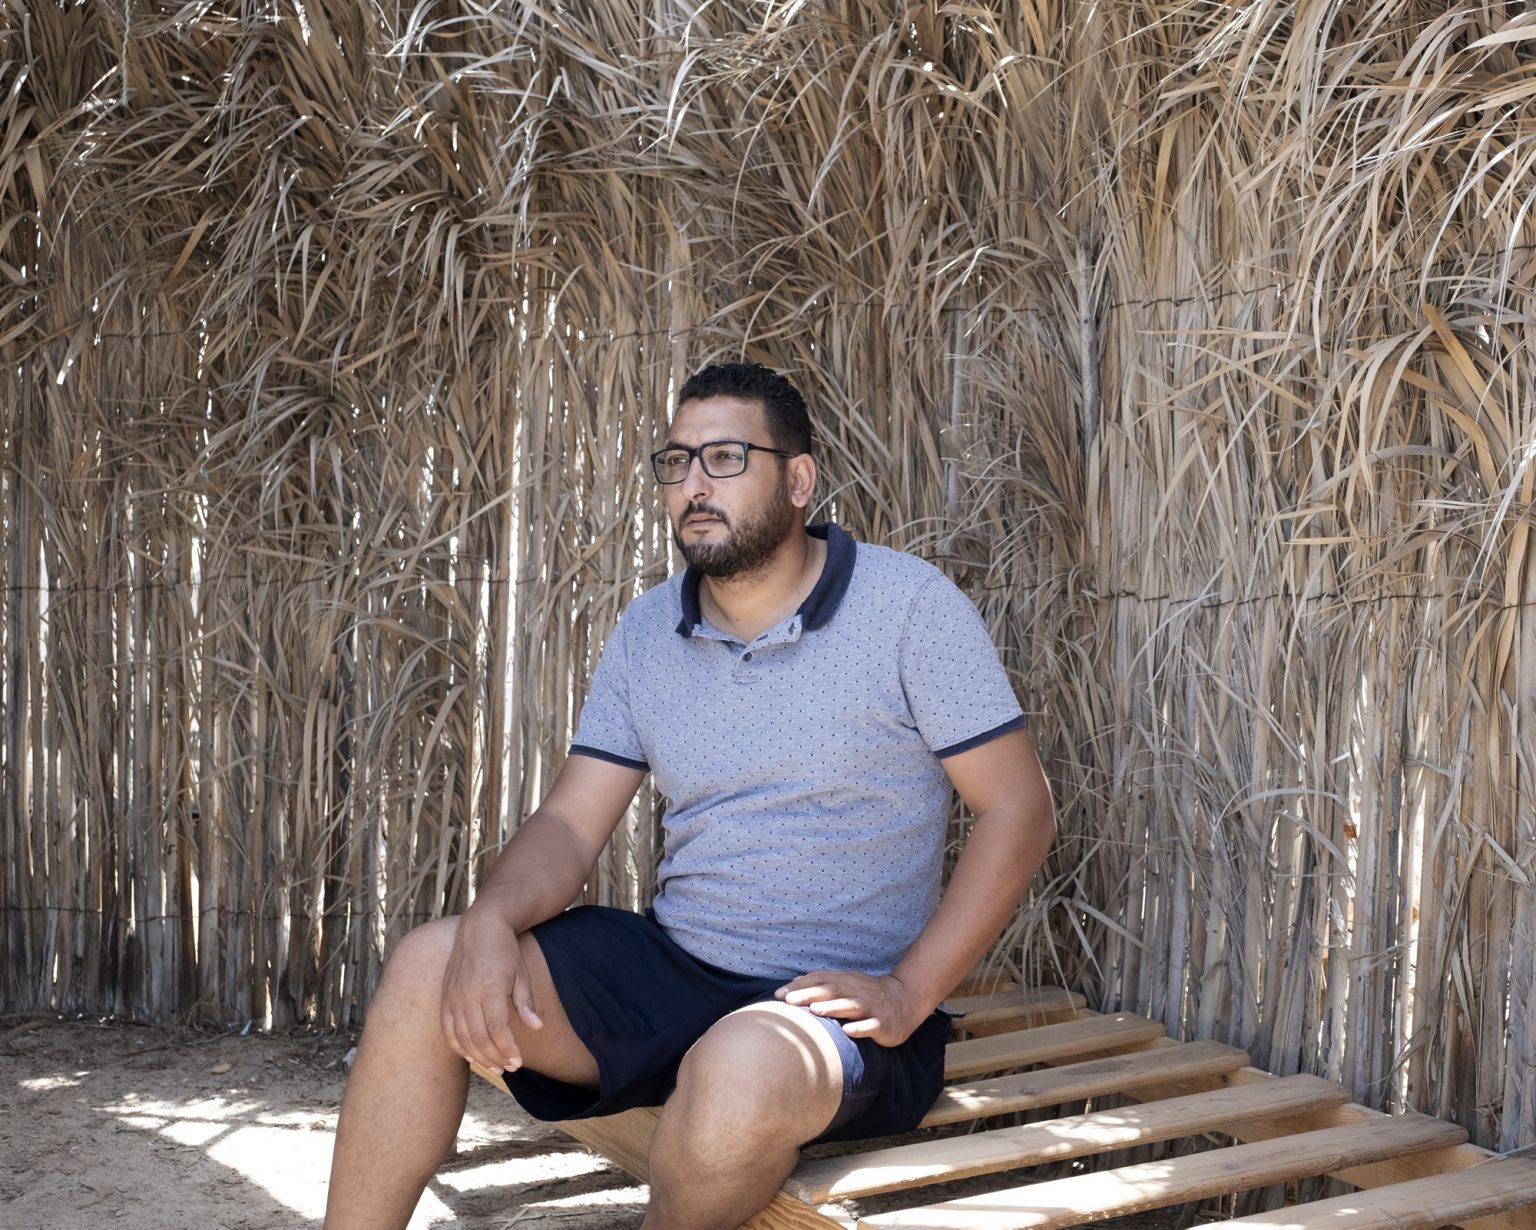 Kerkennah Islands (Tunisia), June 2022 - Portrait of Ahmed Soussi, 34, president of the Kraten association for the sustainable development of culture and leisure. As an environmental activist, Ahmed is involved in an association project supported by the COSPE Onlus for the protection of the rights of female fishermen and clam harvesters.
><
Isole Kerkennah (Tunisia), giugno 2022 - Ritratto di Ahmed Soussi, 34 anni, presidente dellassociazione Kraten per lo sviluppo sostenibile della cultura e del tempo libero. Come attivista ambientale, Ahmed è coinvolto in un progetto associativo sostenuto dalla Onlus COSPE per la tutela dei diritti delle donne pescatrici e raccoglitrici di vongole.